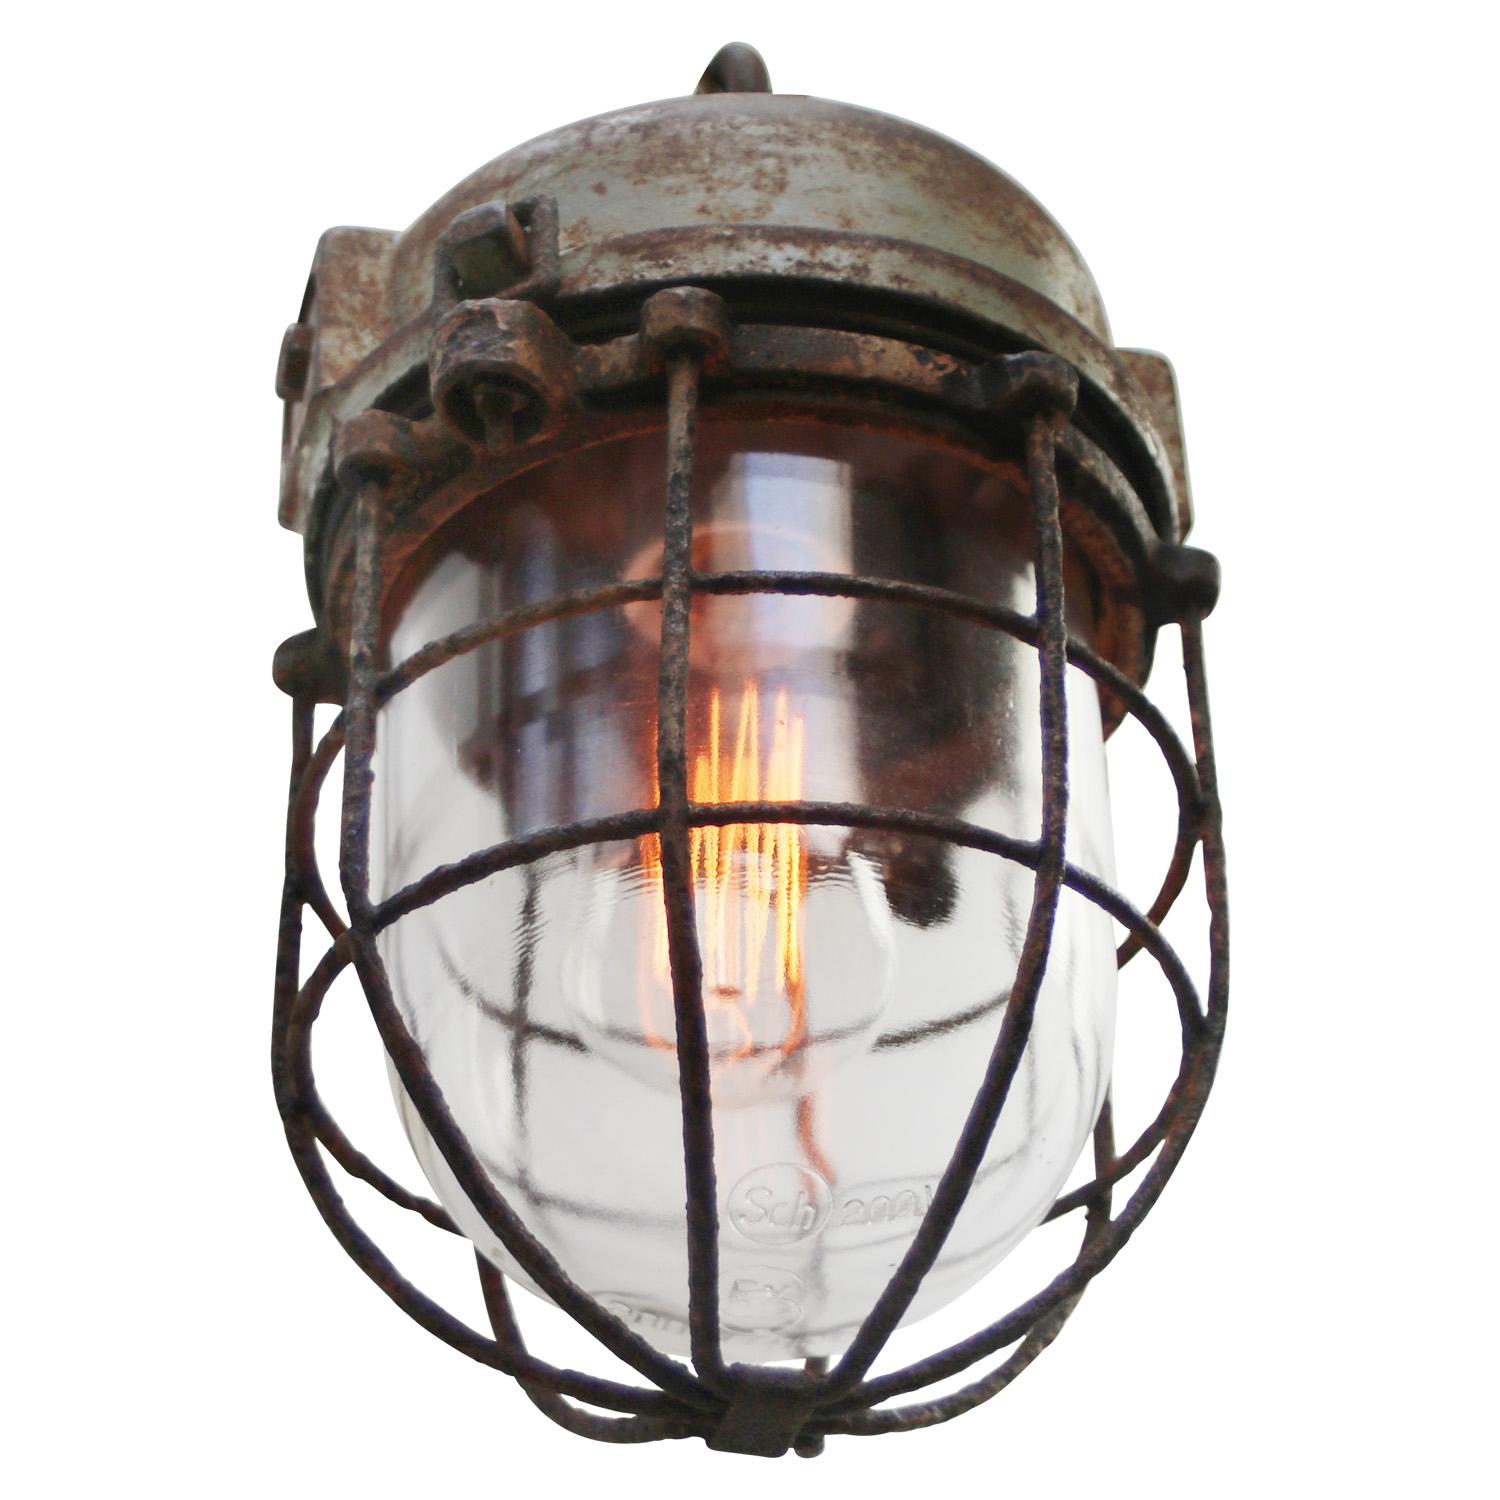 Vintage European industrial hanging lamp.
Cast iron with clear glass.

Weight 5.10 kg / 11.2 lb

Priced per individual item. All lamps have been made suitable by international standards for incandescent light bulbs, energy-efficient and LED bulbs.